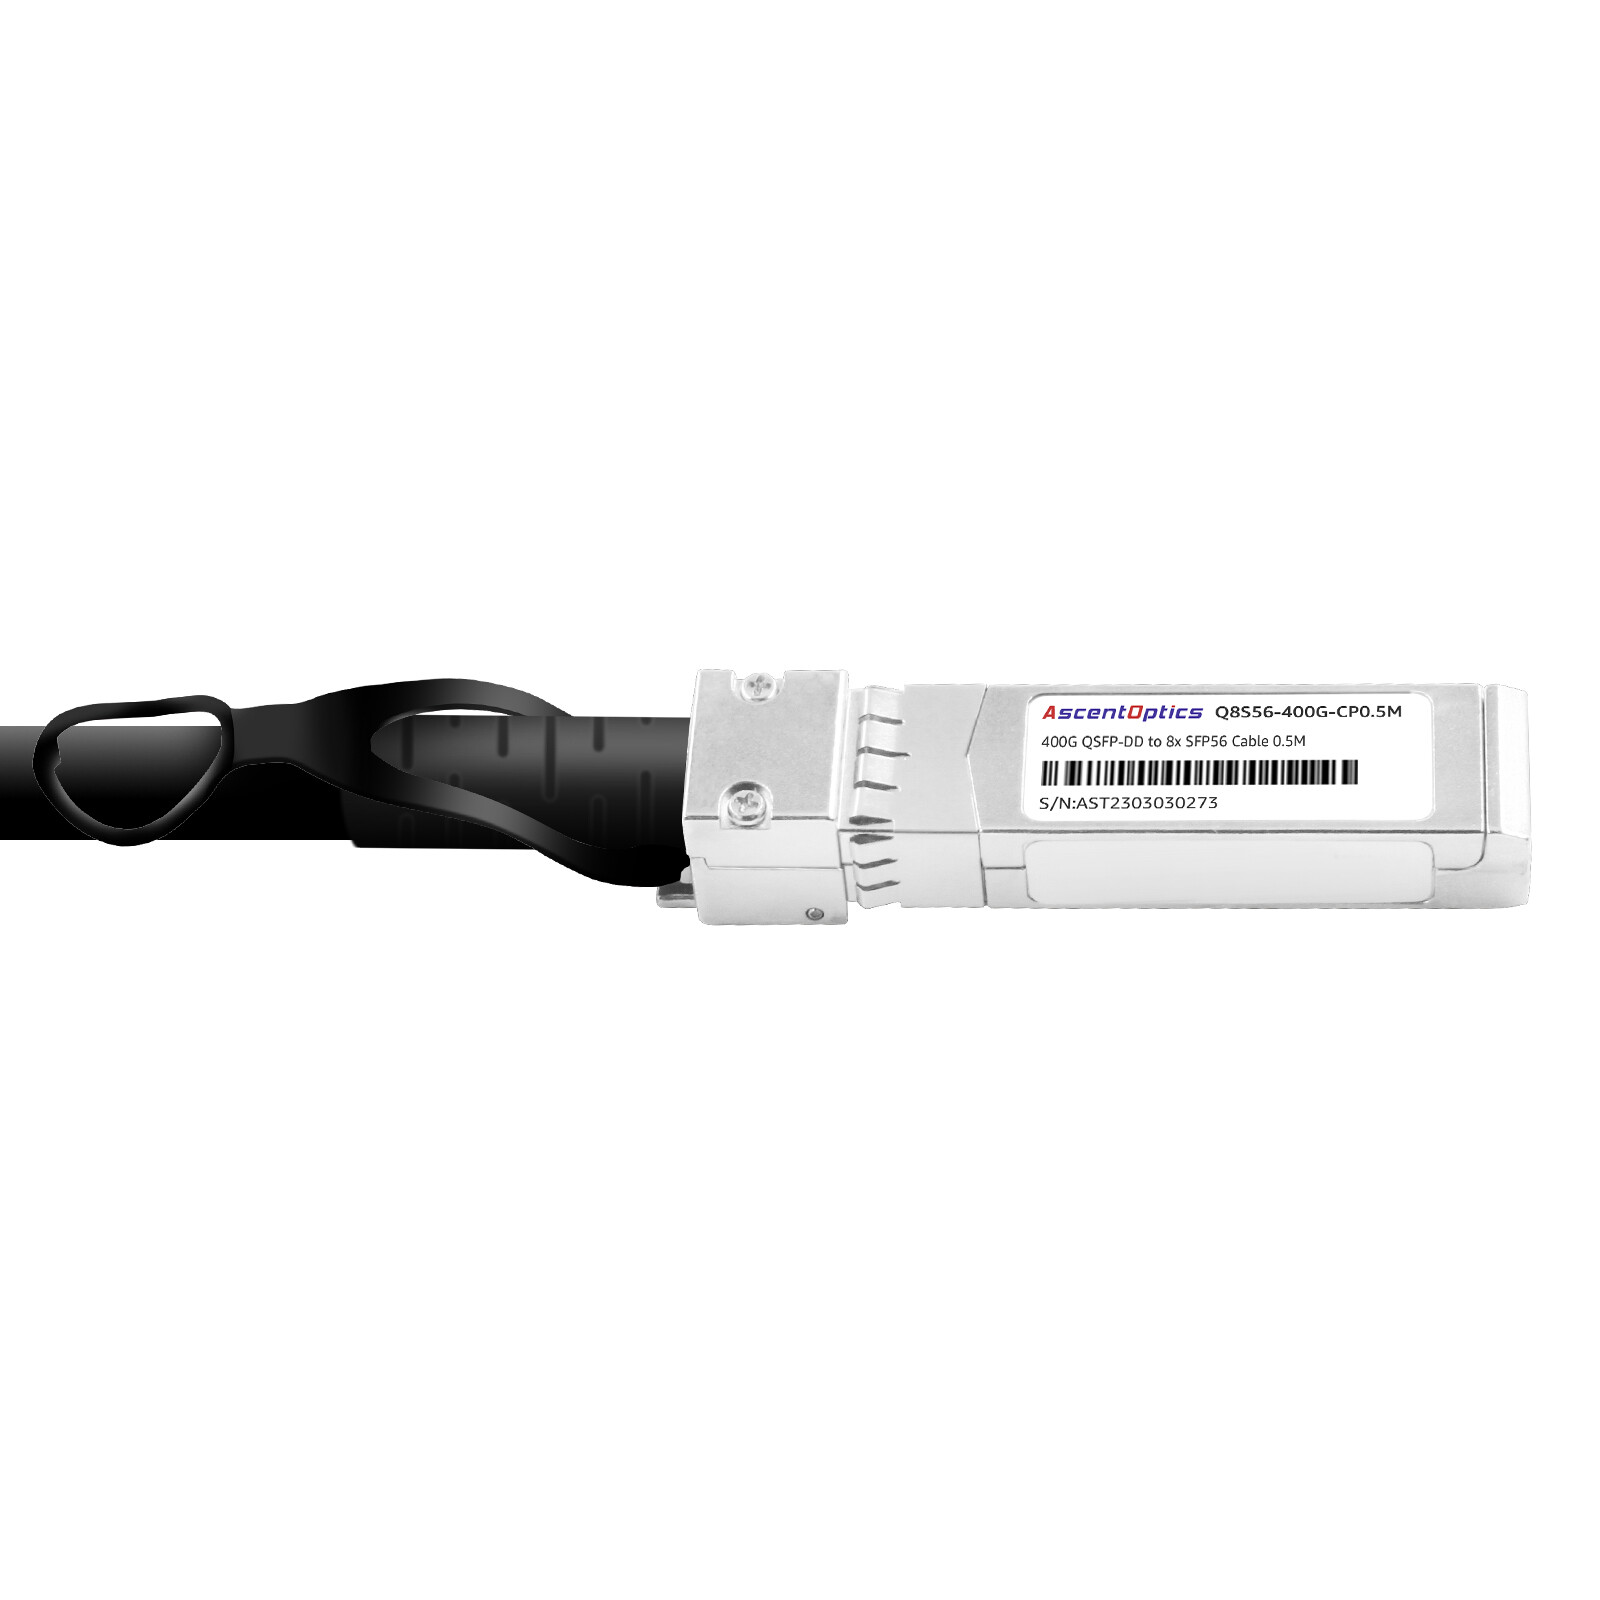 400G QSFP-DD to 8x 50G SFP56 Copper Breakout Cable,0.5 Meter,Passive